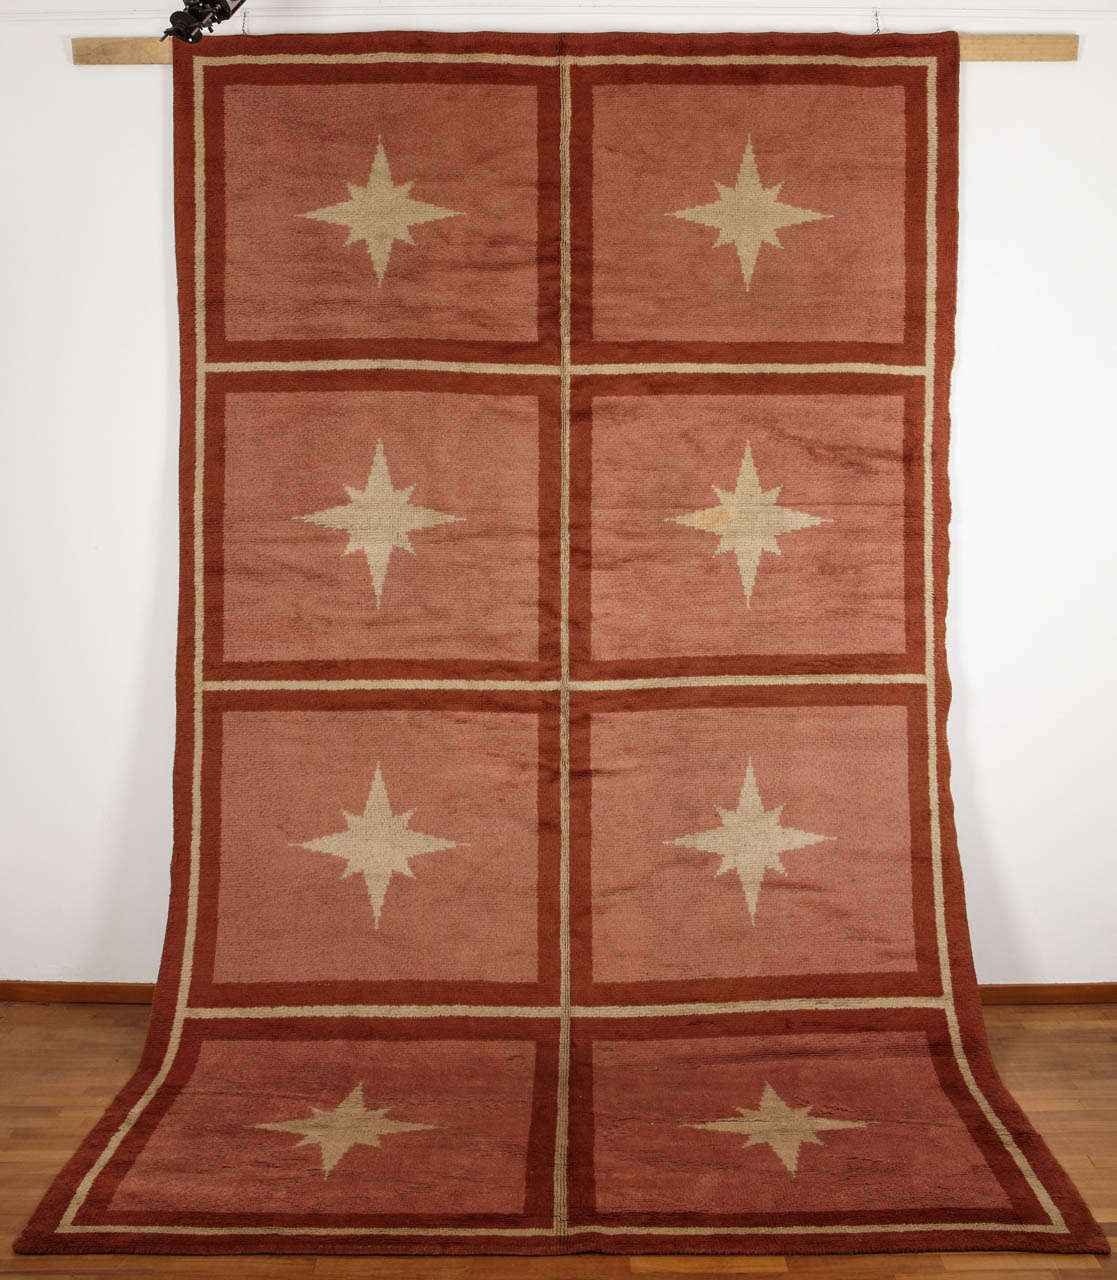 The early carpets of the Art Deco period had the prerogative of proposing a new set of patterns based on re-interpretation of classical western decorative motifs. 
In this example we see a compartment design typical of French and English needlepoint